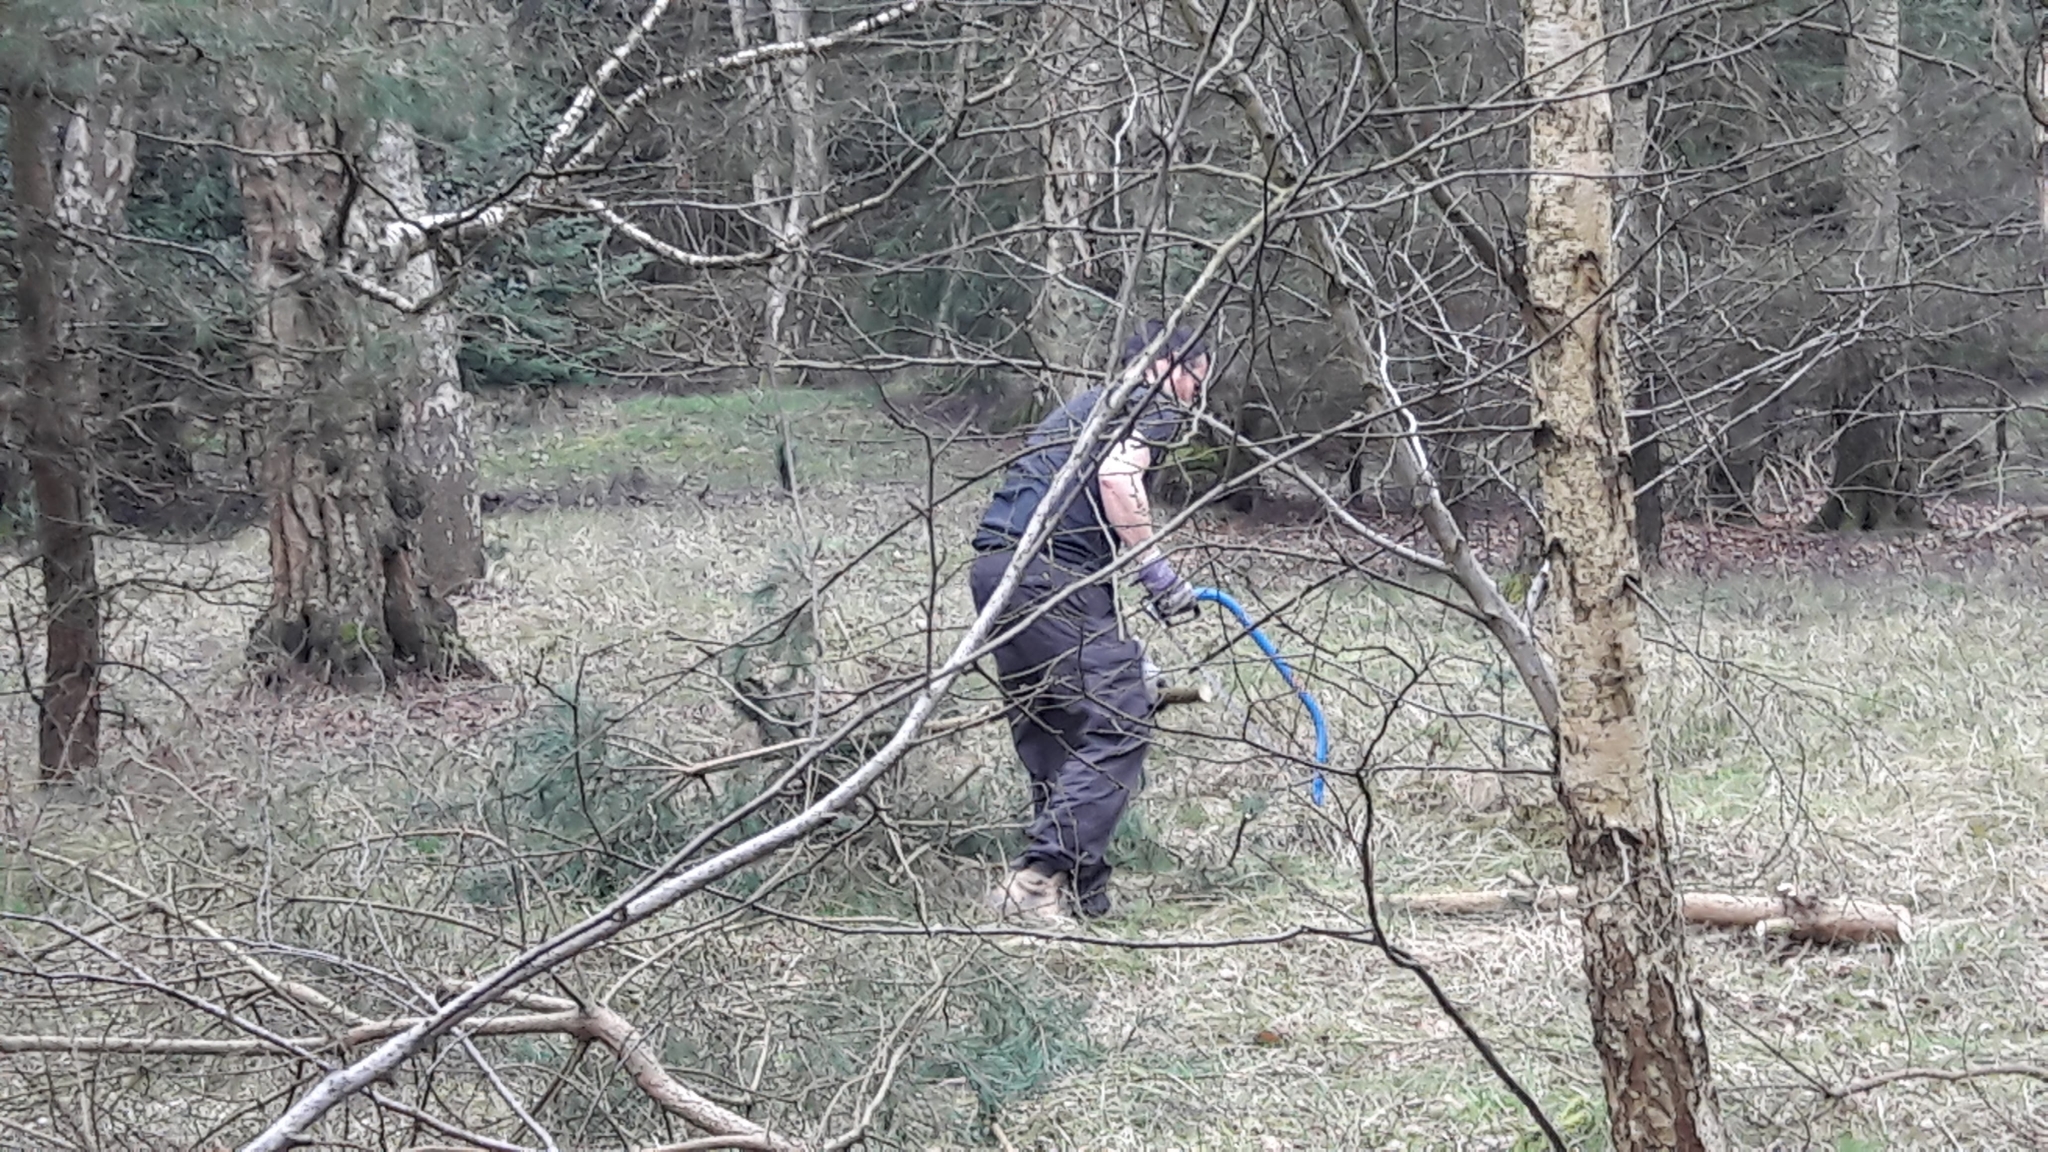 A photo from the FoTF Conservation Event - April 2018 - Improving habitat at High Lodge : A volunteer uses a saw on a small felled tree